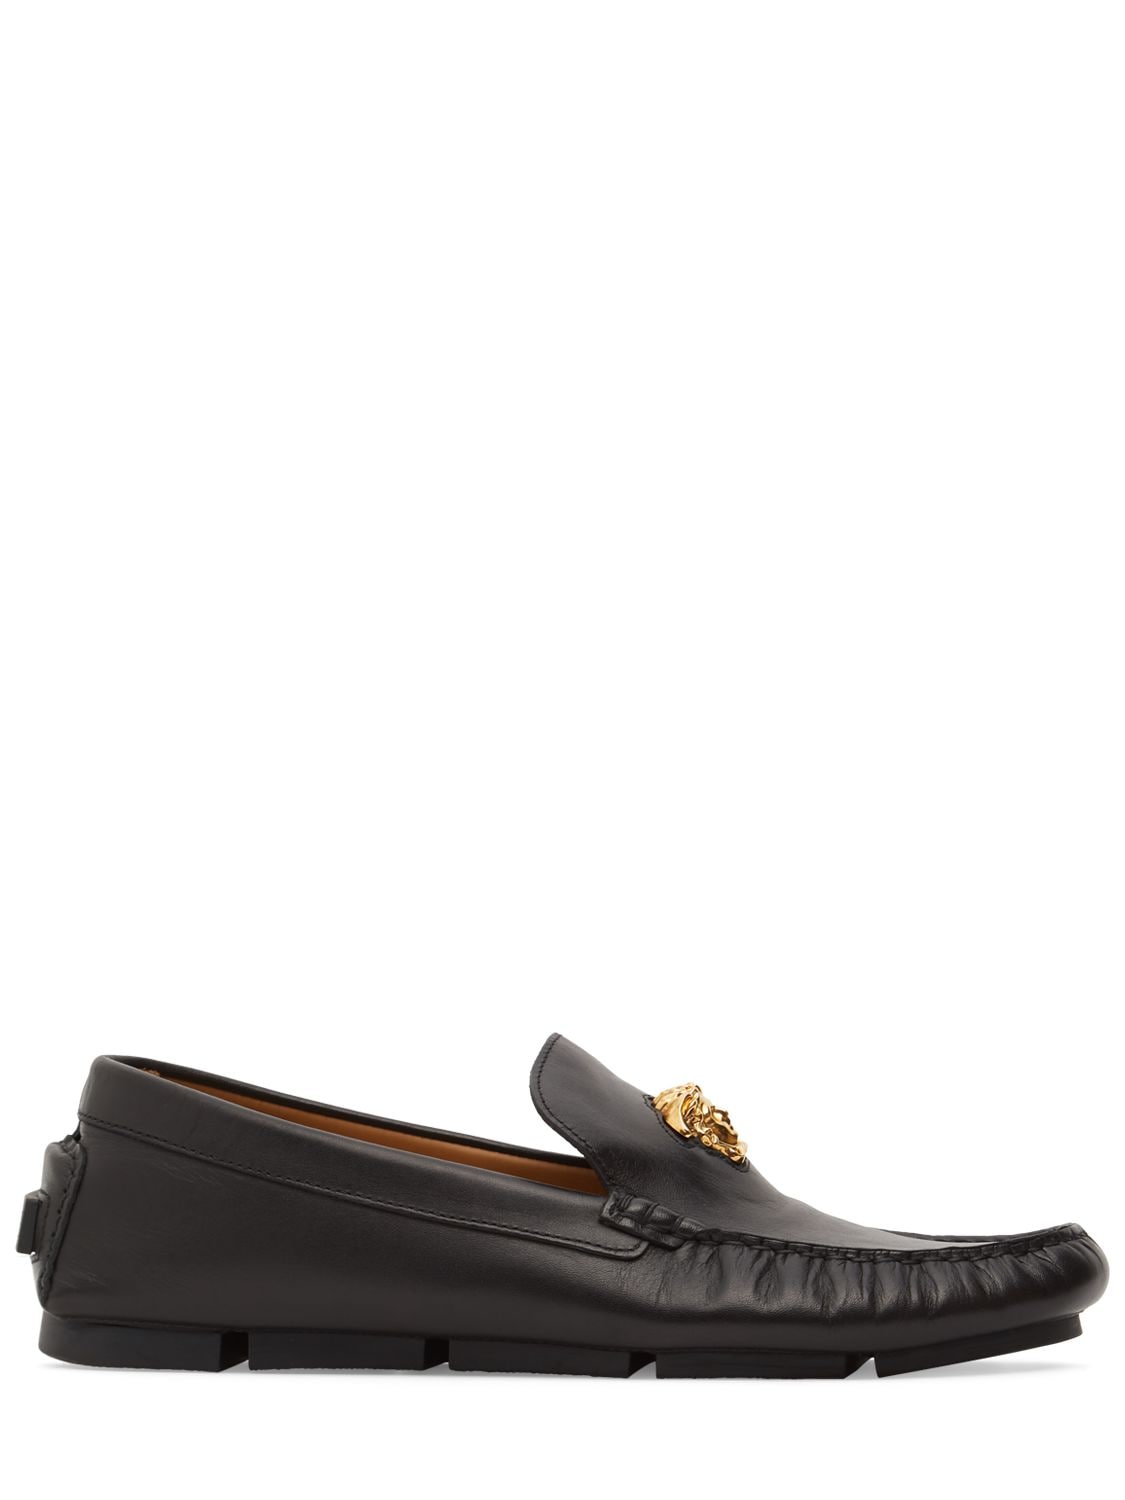 Versace Leather Loafers W/ Medusa Detail In Black